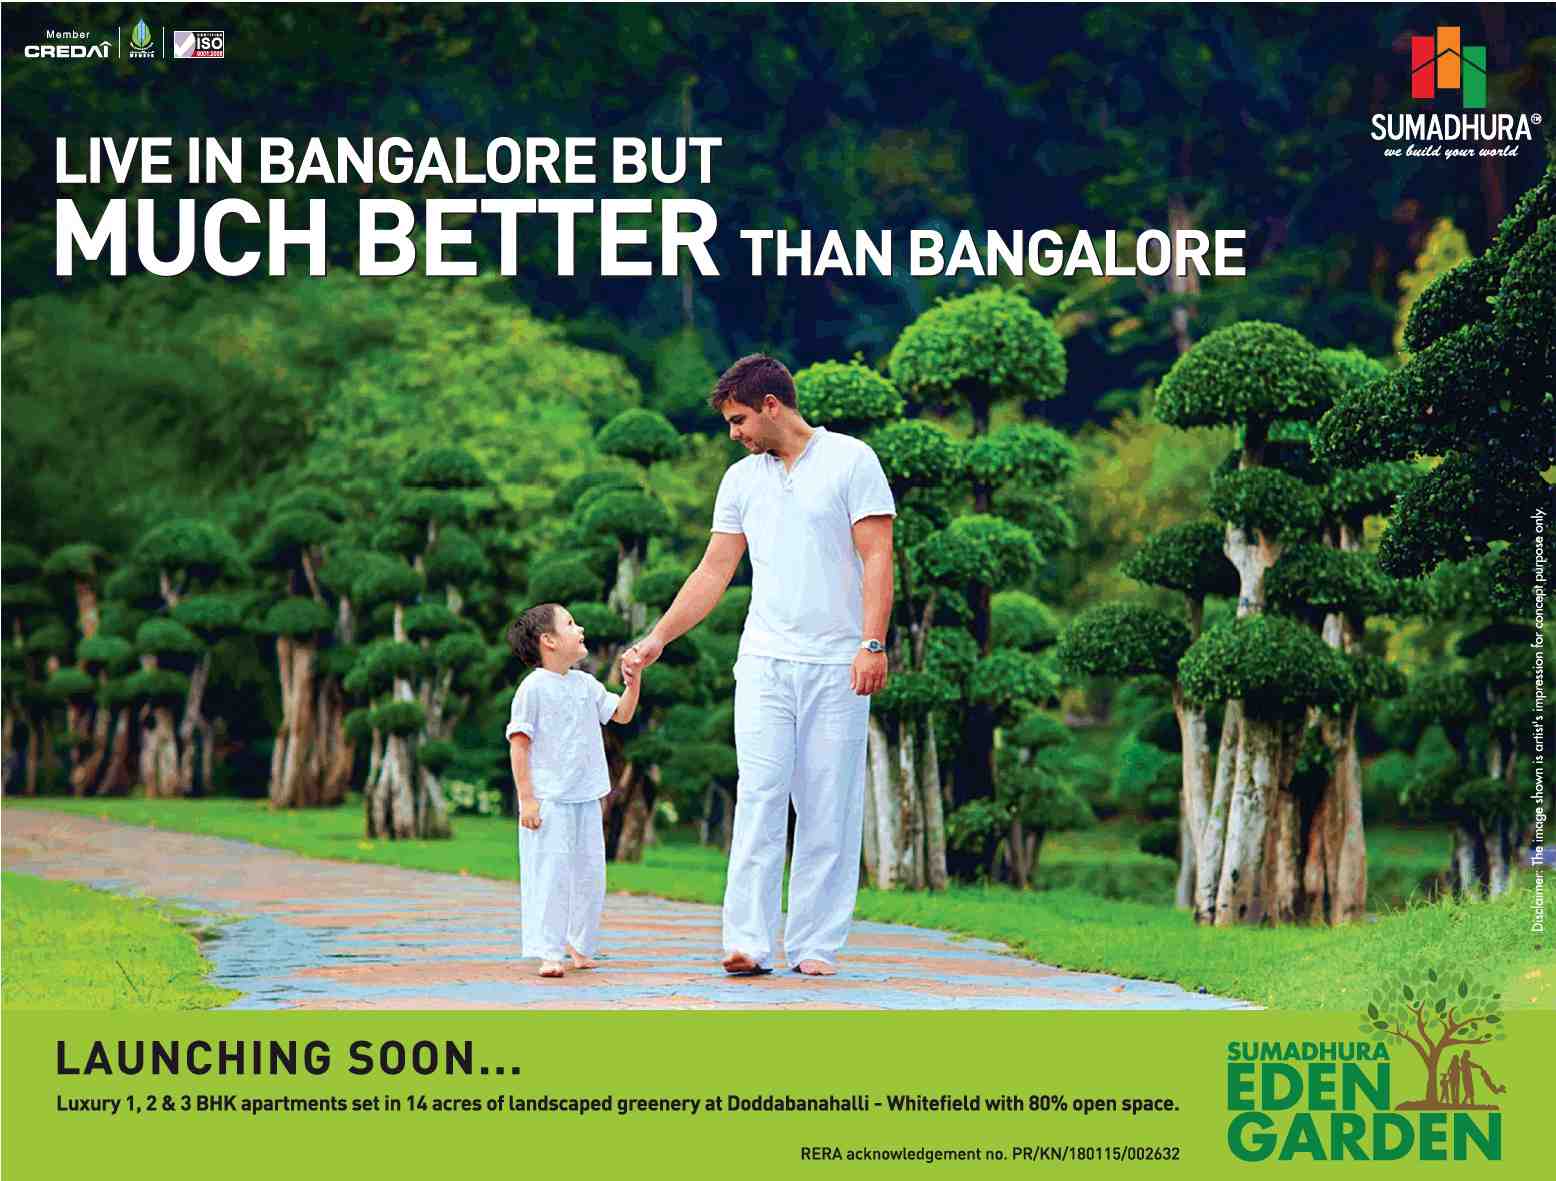 Reside in the homes boast of unmatched quality at Sumadhura Eden Garden in Bangalore